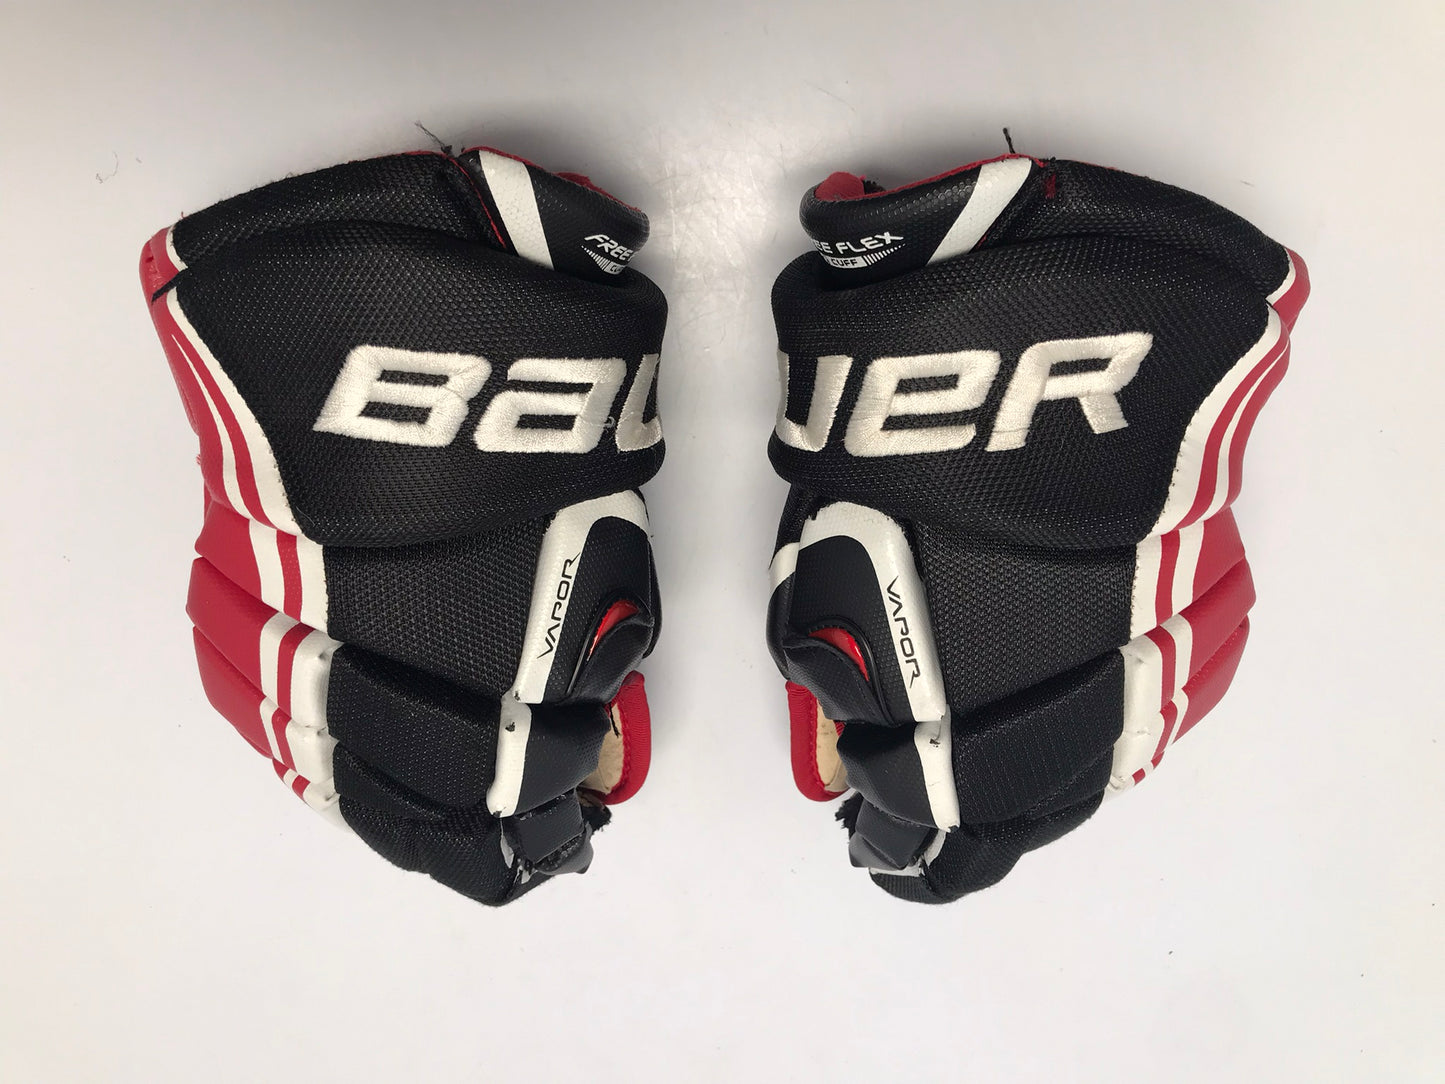 Hockey Gloves Child Size 12 inch Junior Bauer Vapor X 70 Black Red Like New Outstanding Quality